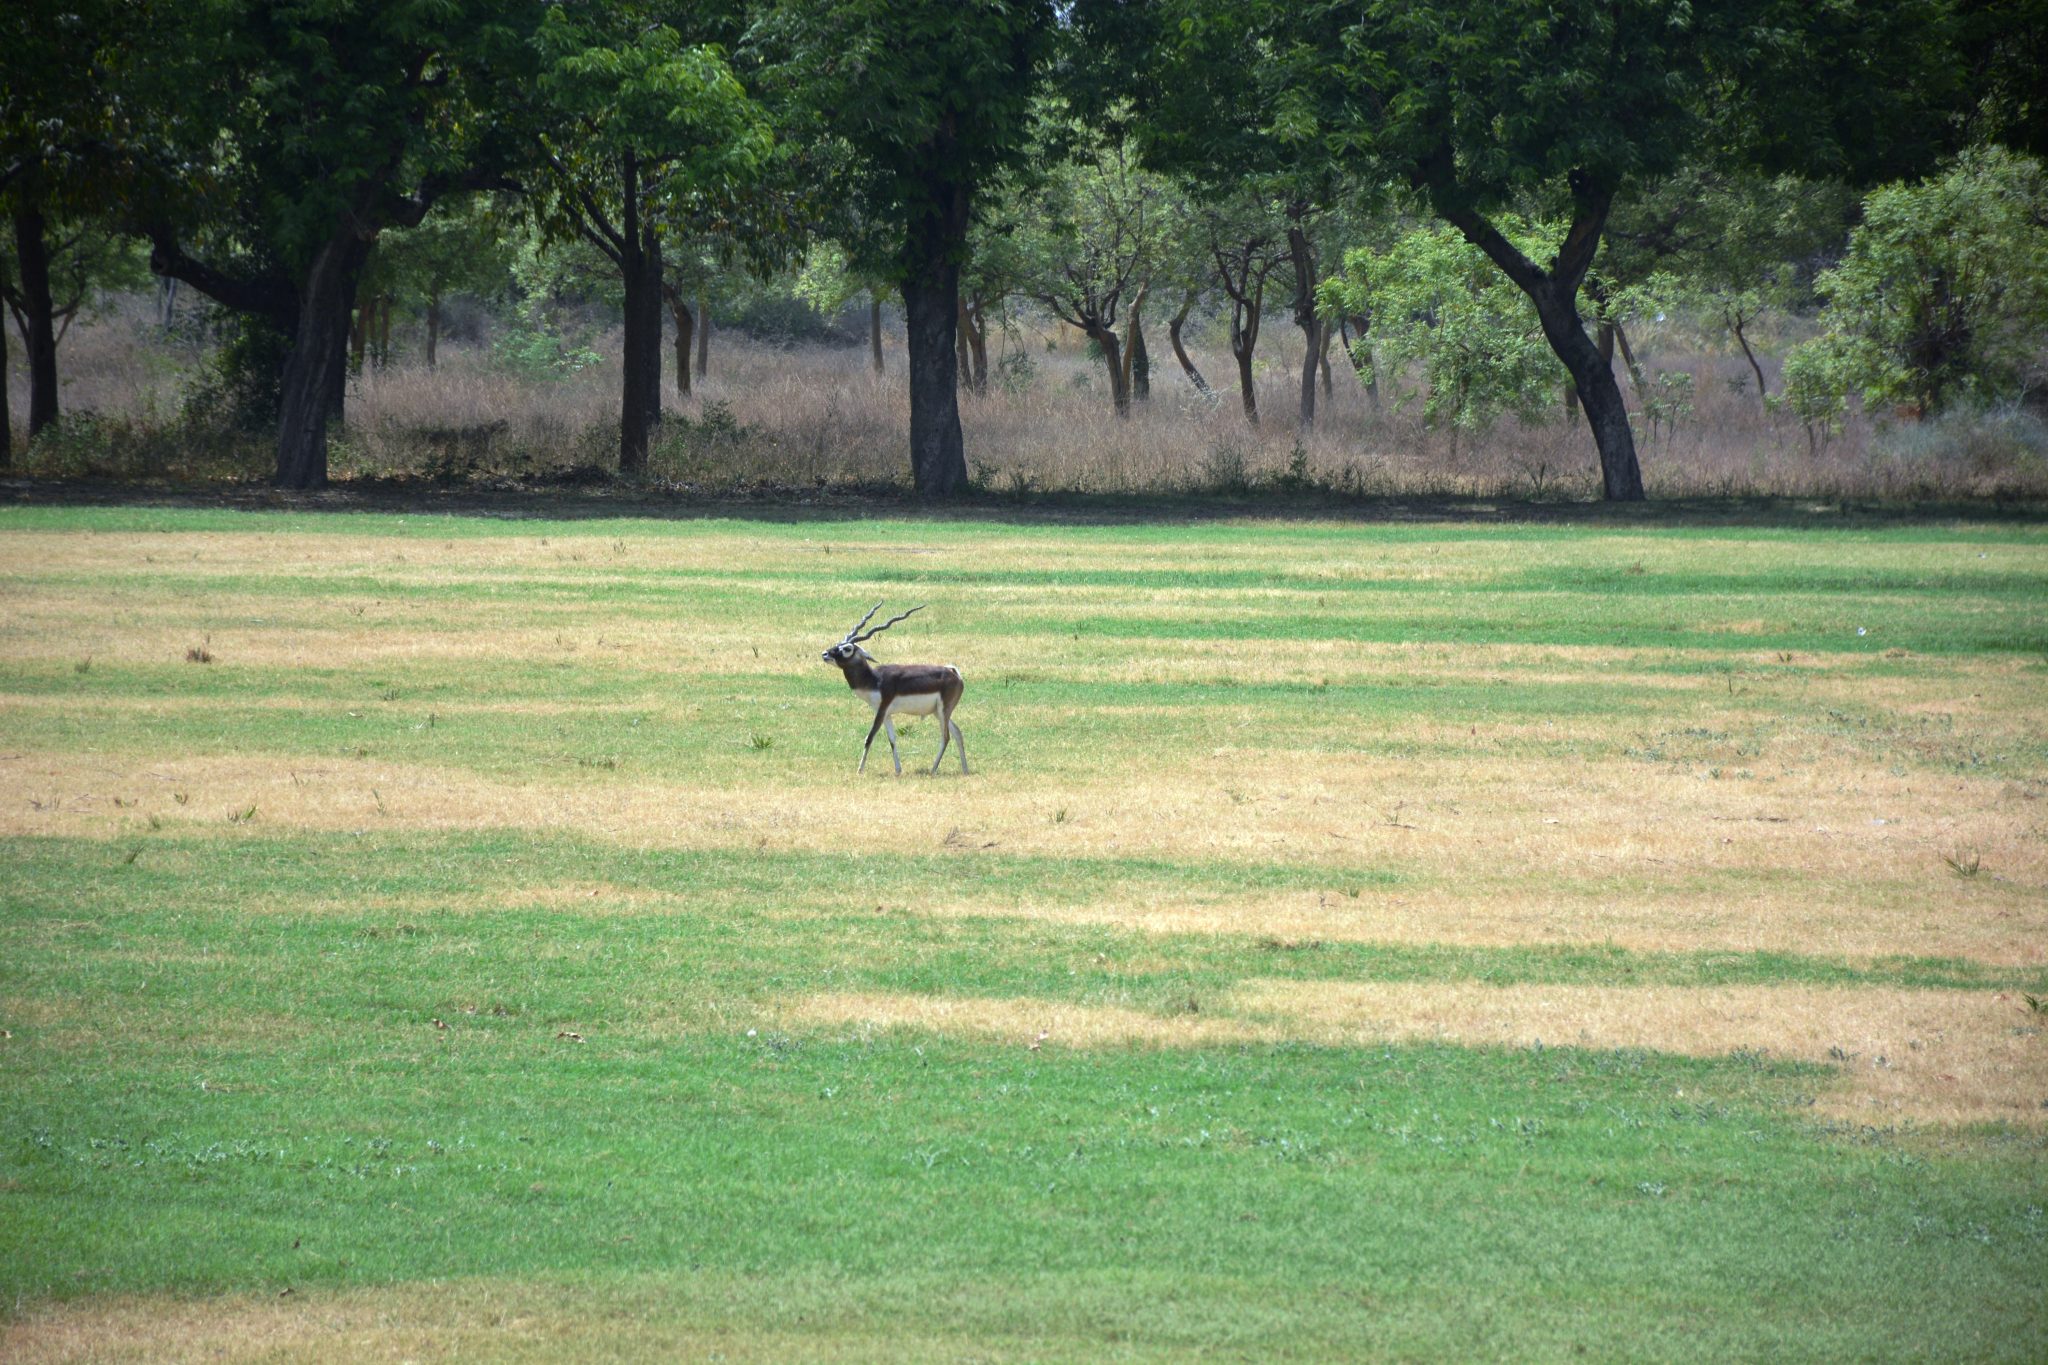 Blackbuck/Indian antelope male. The photo is taken from Akbar's tomb, in Agra, India.